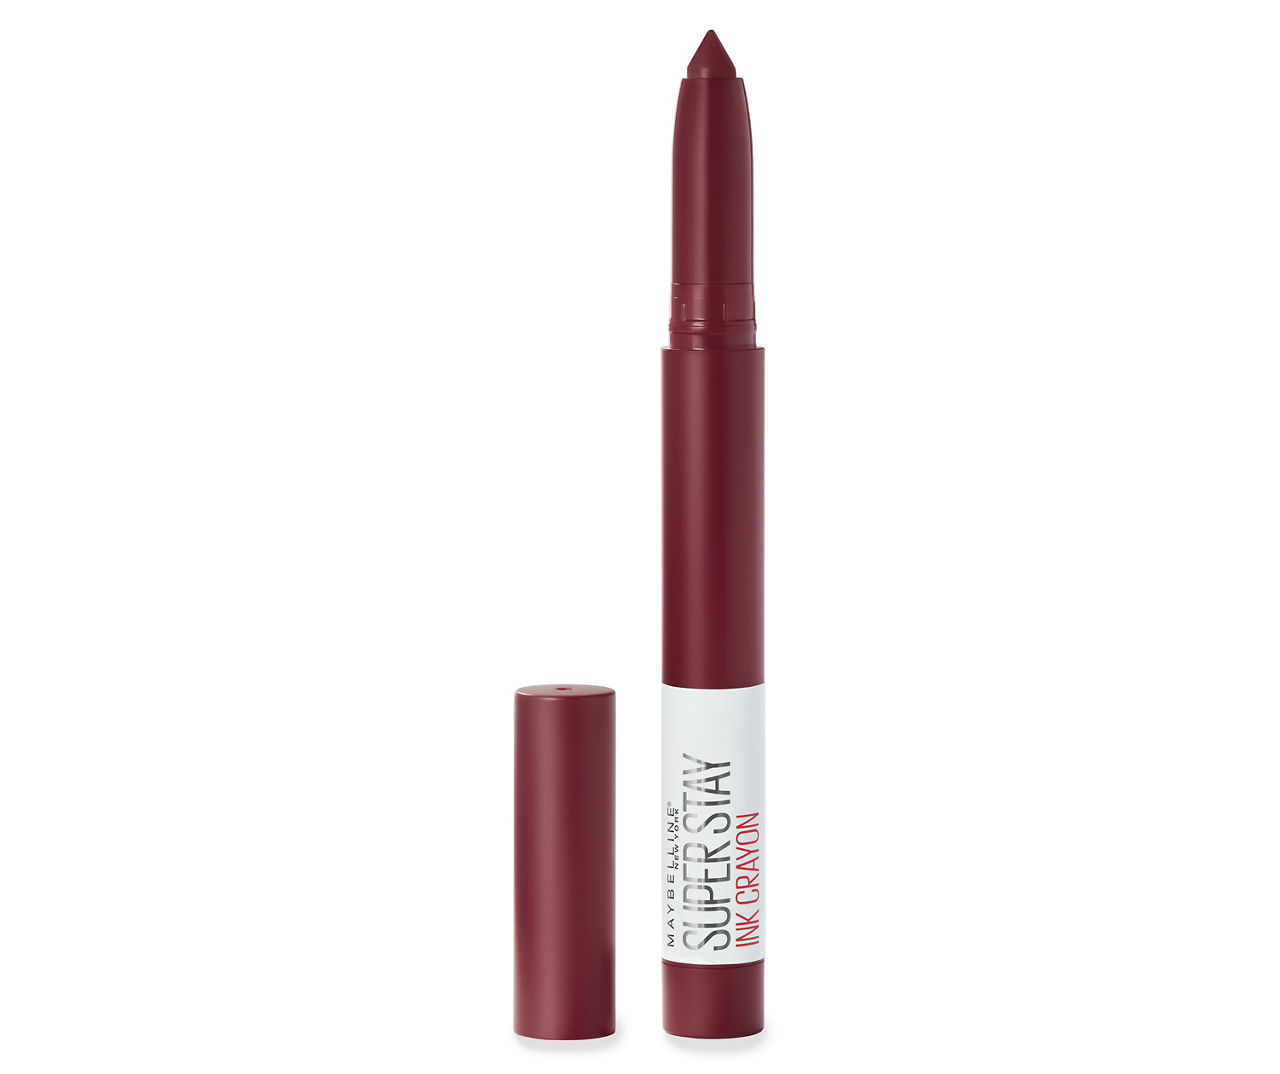 Superstay Ink Crayon Lipstick in Settle for More